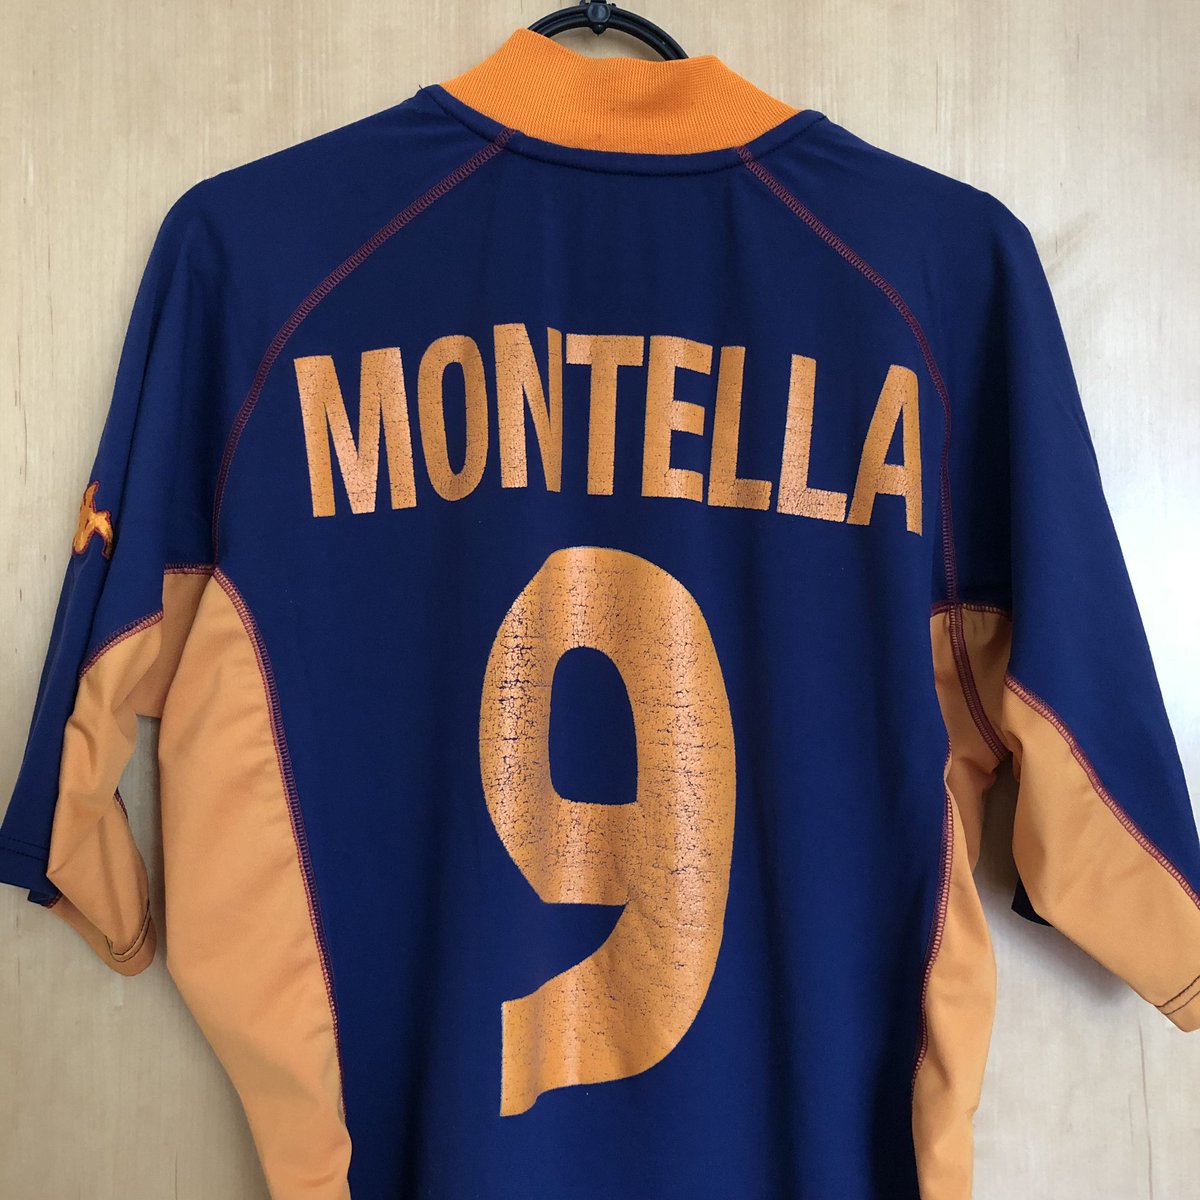 . @ASRomaEN Third Kit, 2001/02KappaPersonalised:  #Montella 9Roma is one of the teams that features the most in my collection. Maybe it’s because I’ve always felt there was a connection between Inter and Roma, a sort of existentialism that both teams’ supporters share...